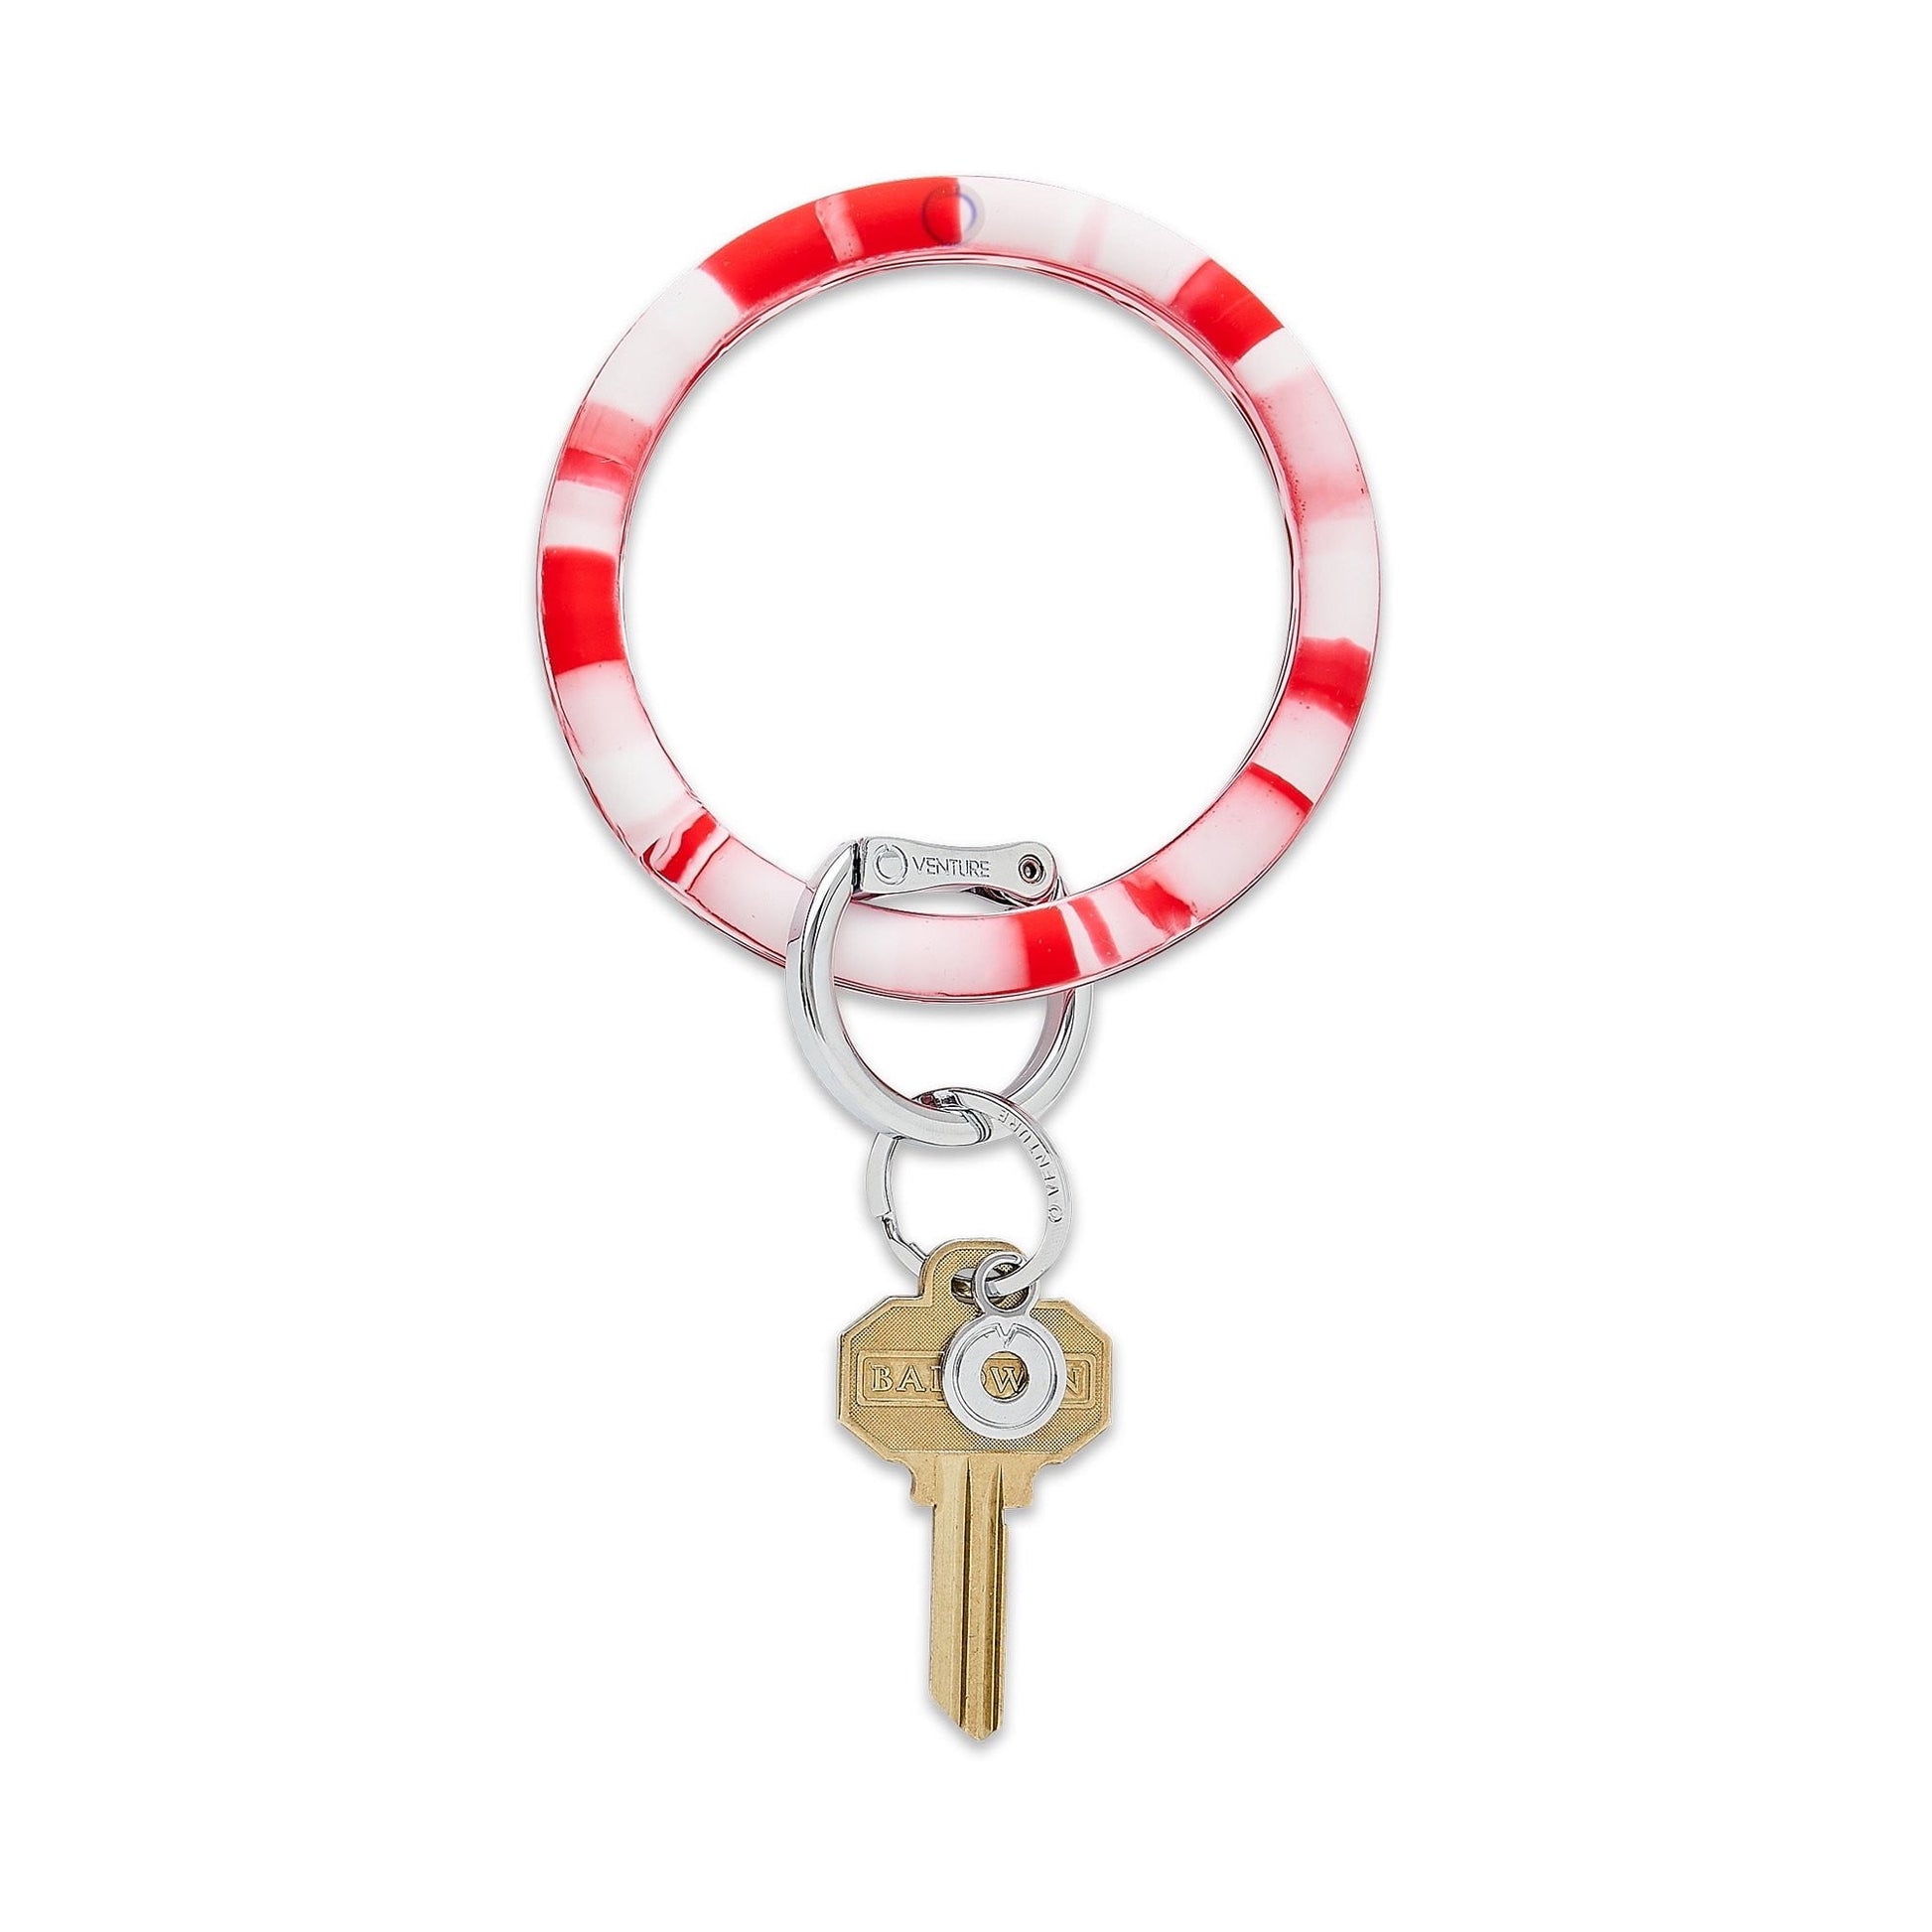 Silicone Big O Key Ring - Cherry on Top Marble